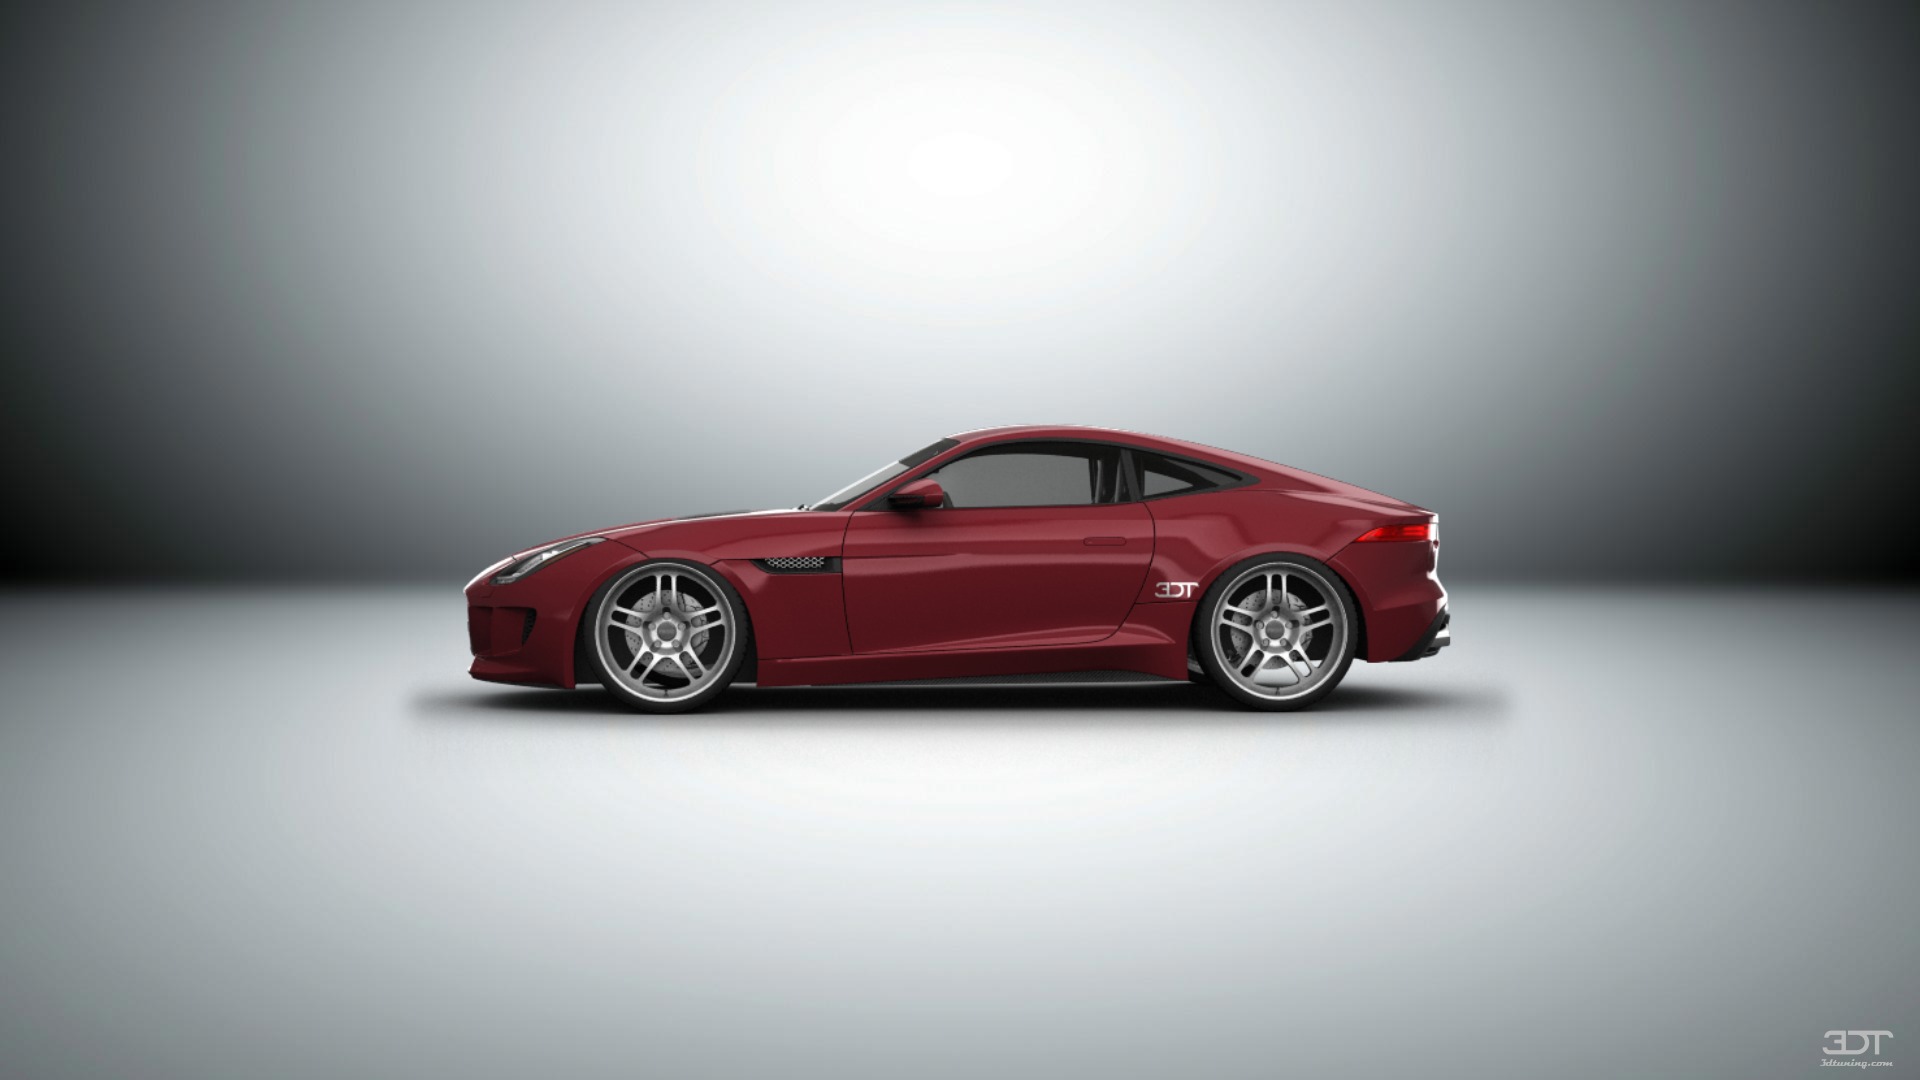 Jaguar F-Type Coupe 2011 tuning